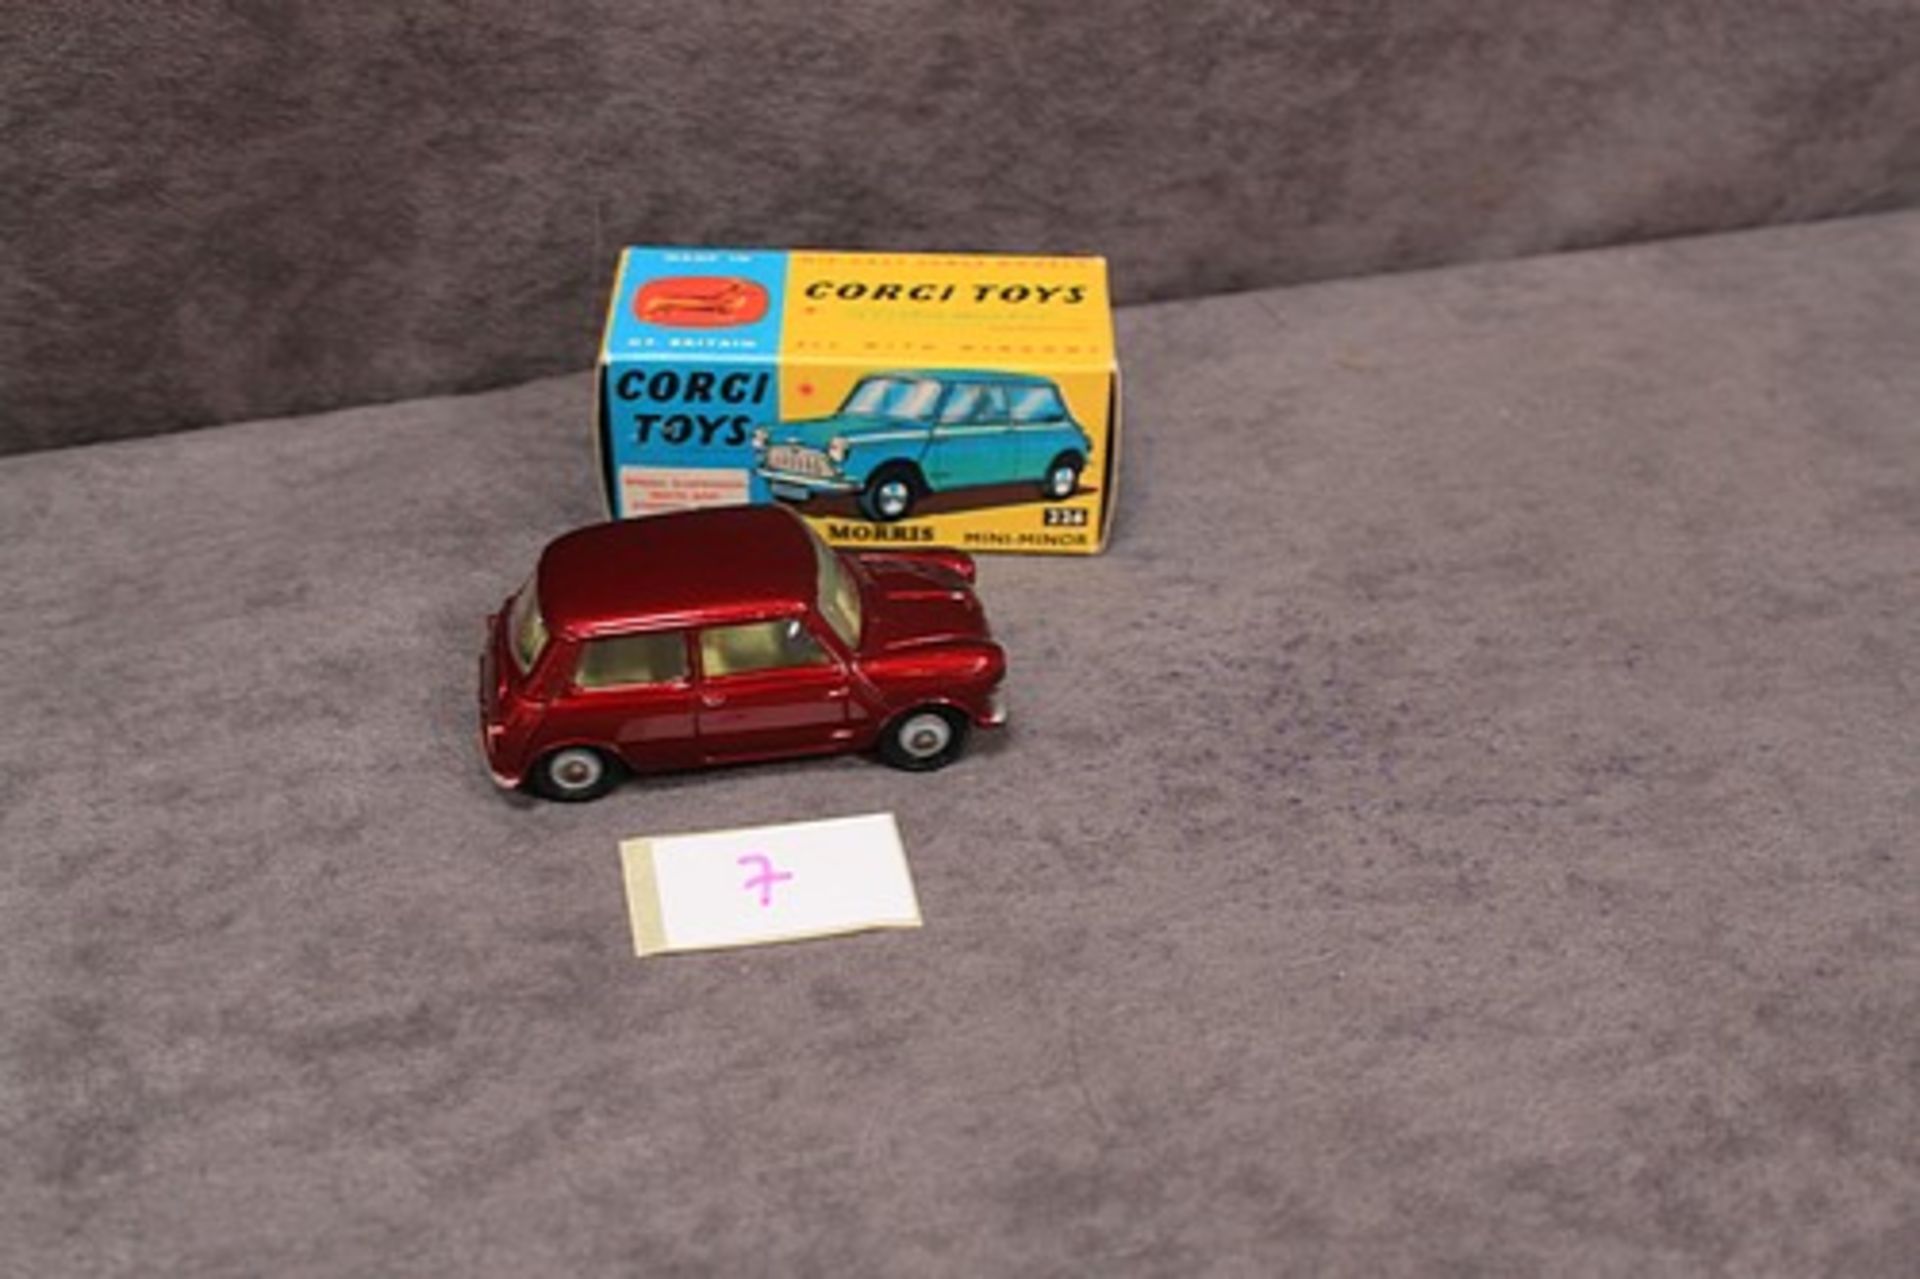 Mint Corgi Toys Diecast #226 Morris Minor in burgundy with leaflet in a mint box - Image 2 of 2